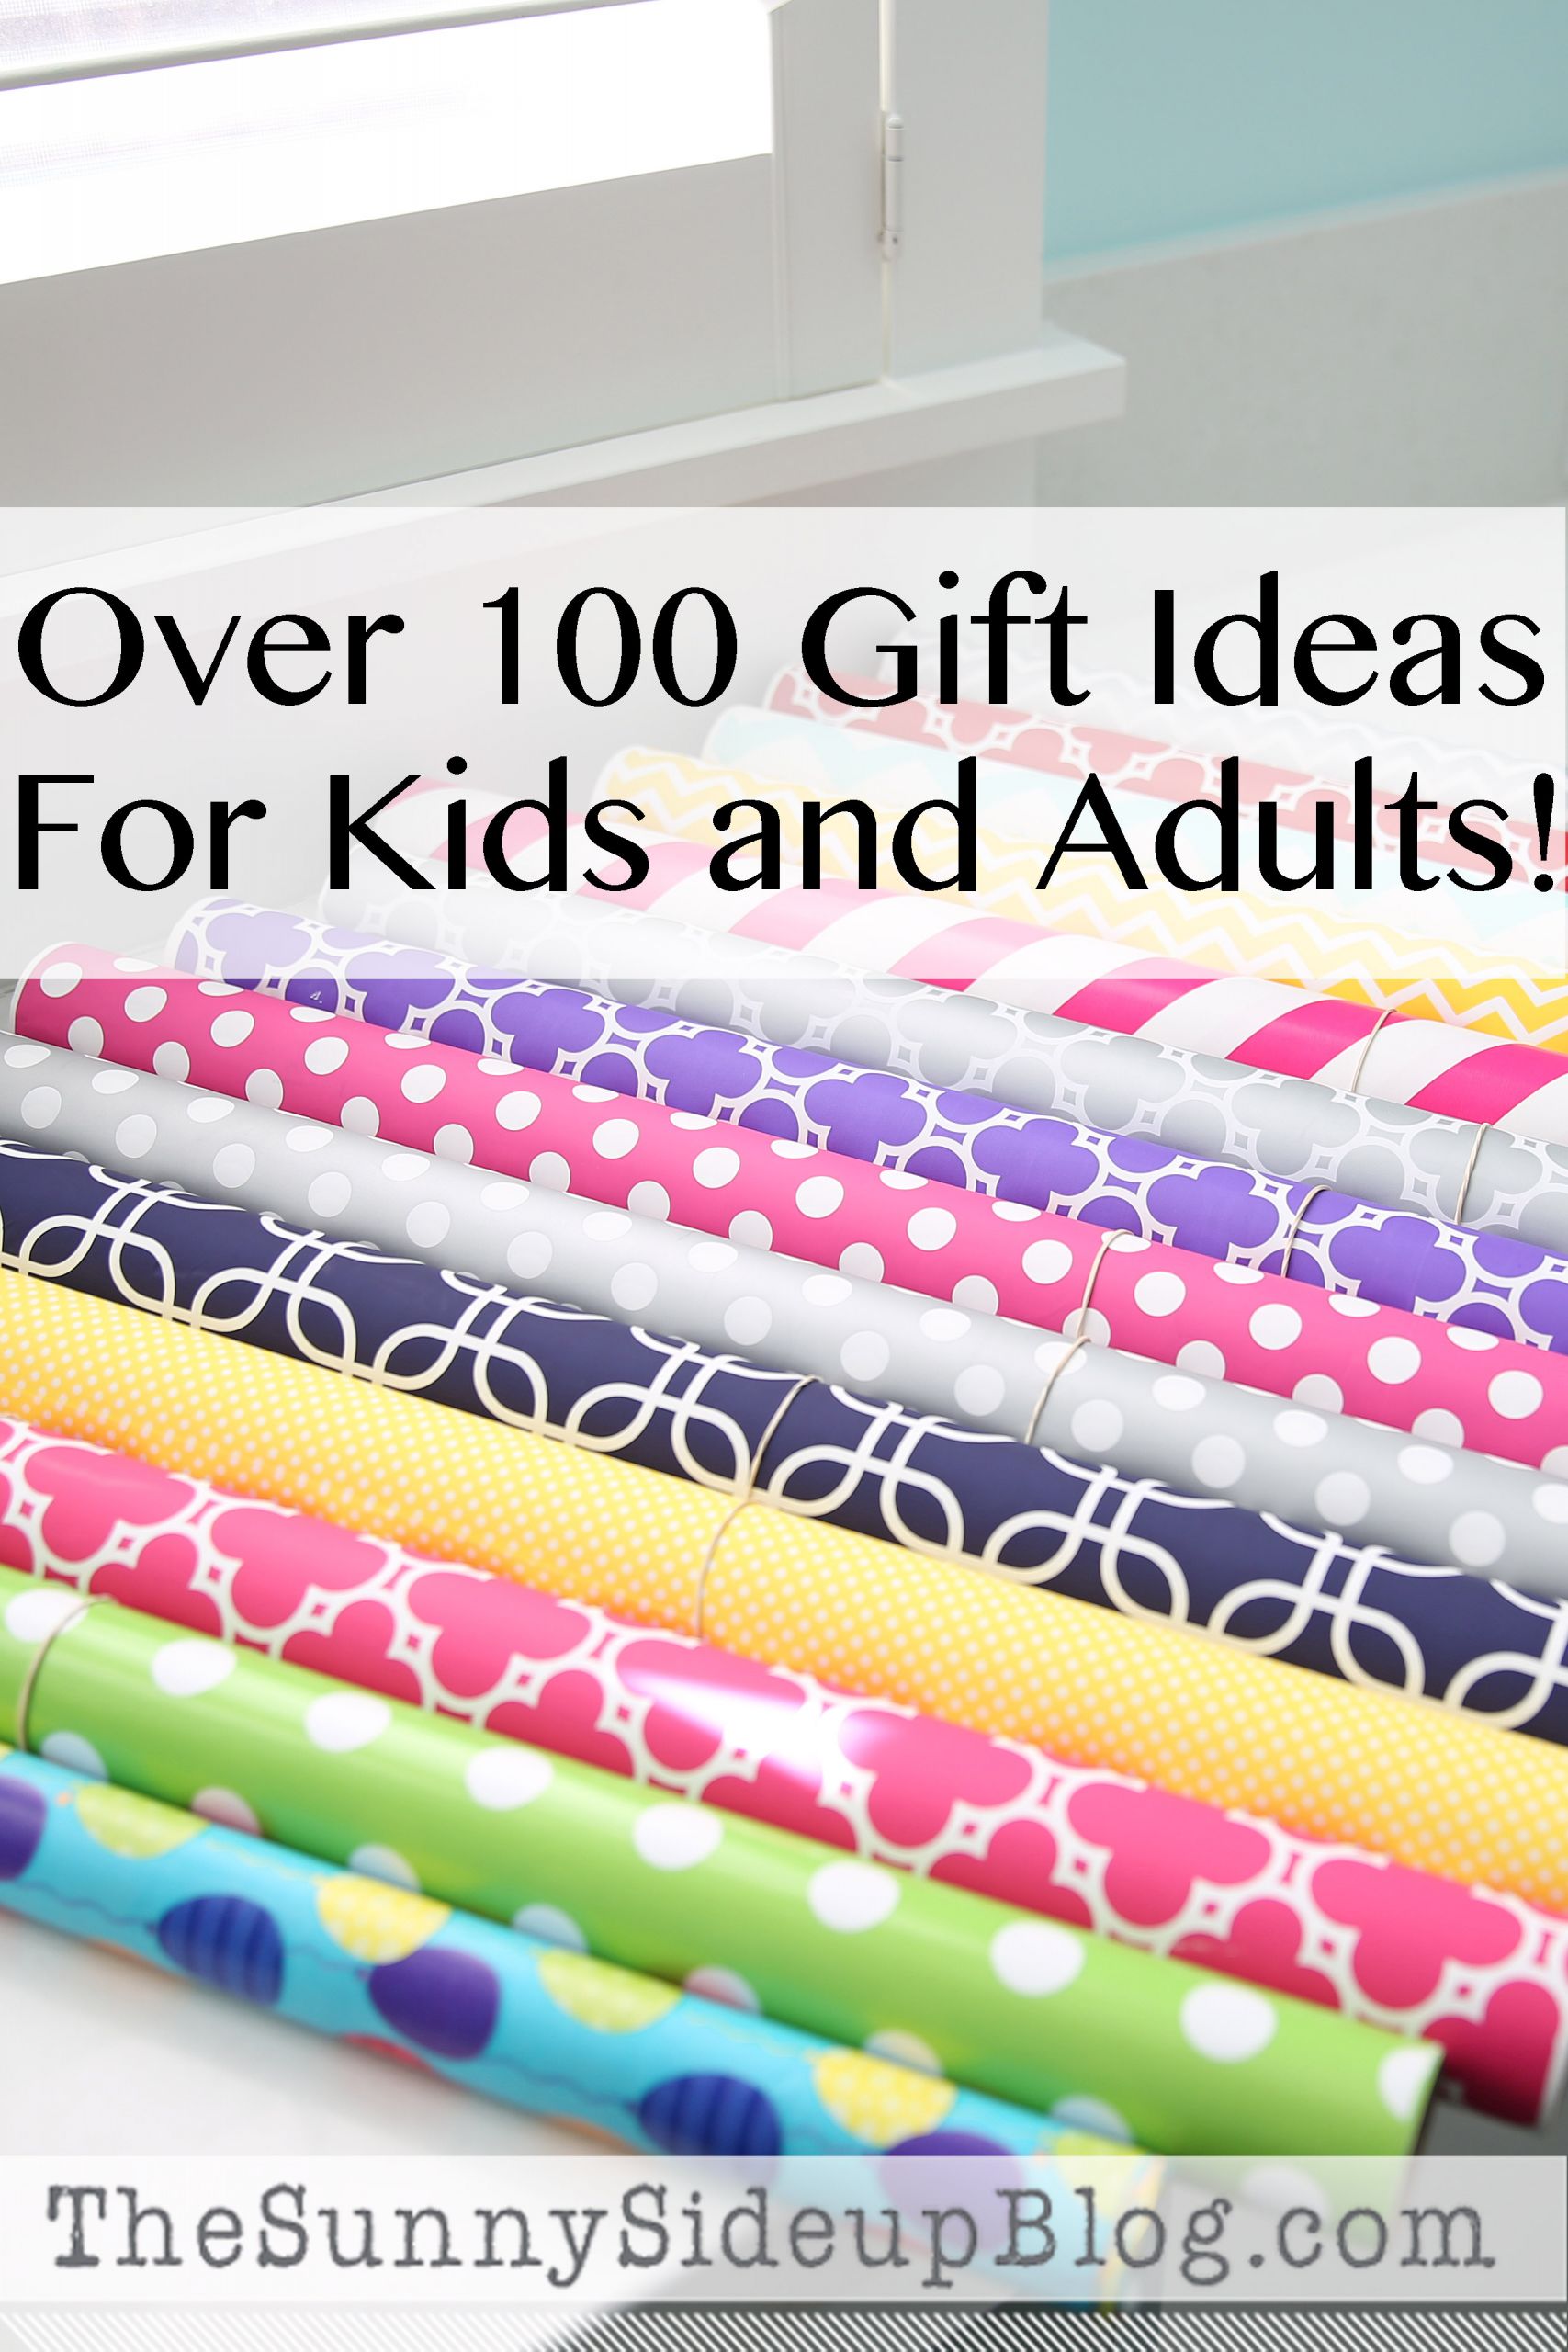 Gift Ideas For Adult Children
 Over 100 t ideas for kids and adults The Sunny Side